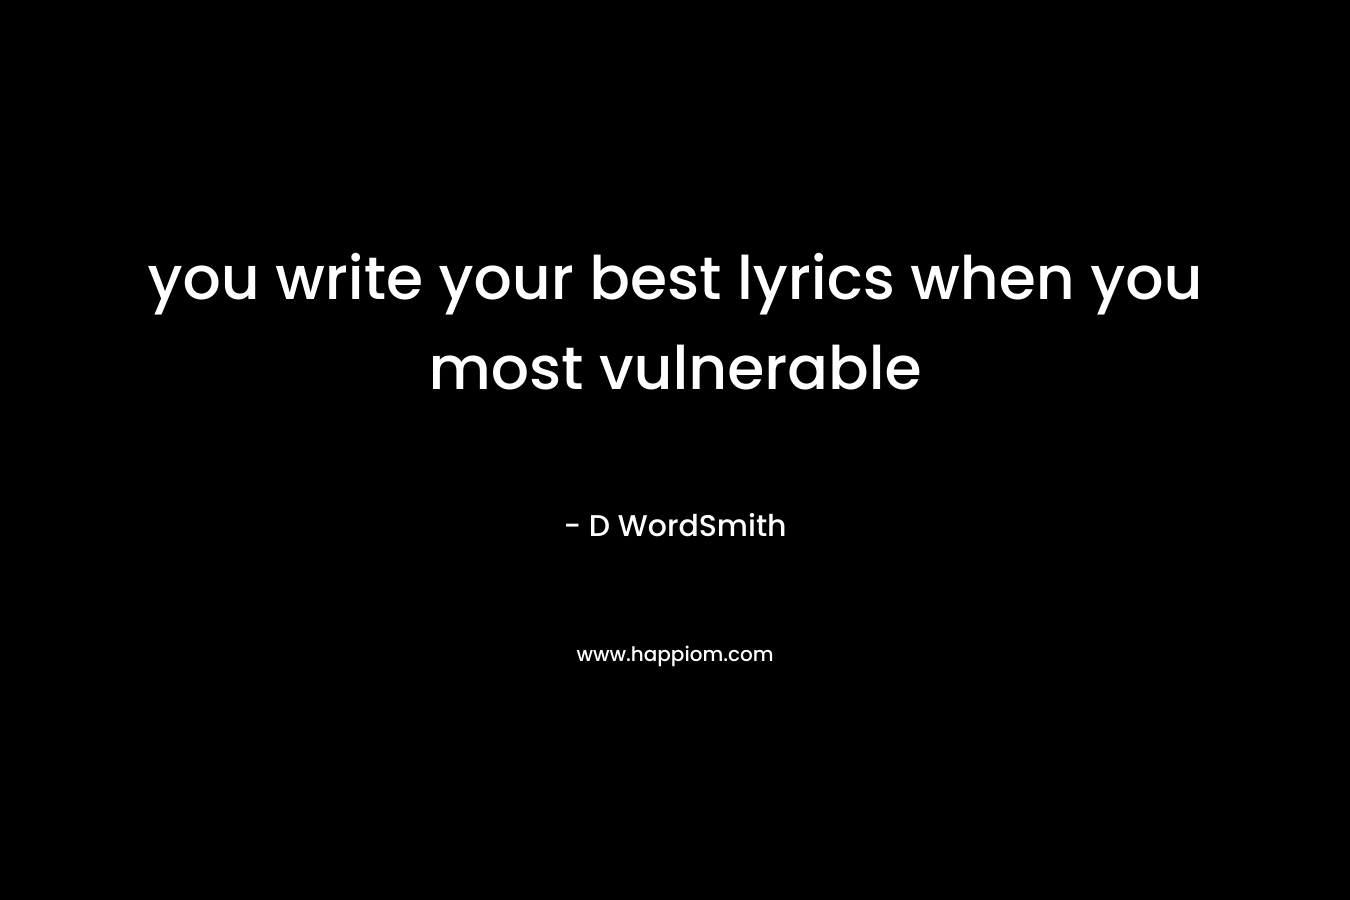 you write your best lyrics when you most vulnerable